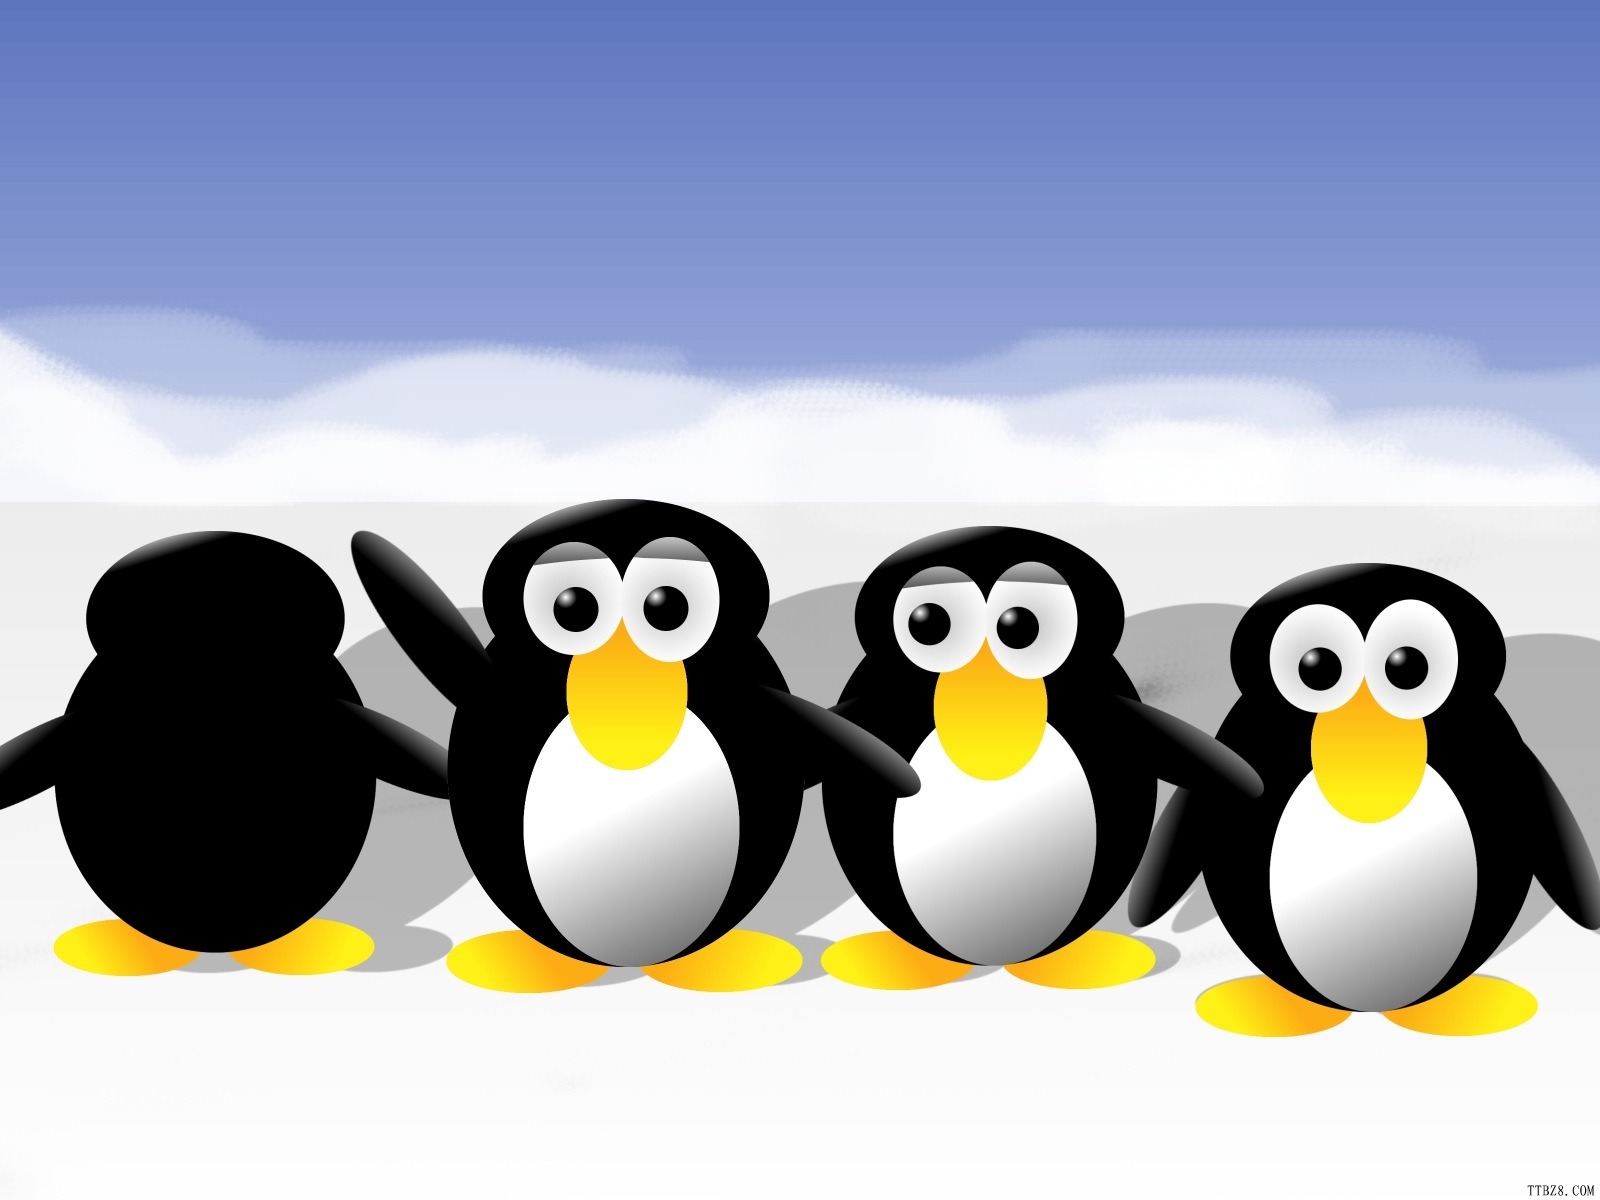 Linux tapety (1) #1 - 1600x1200